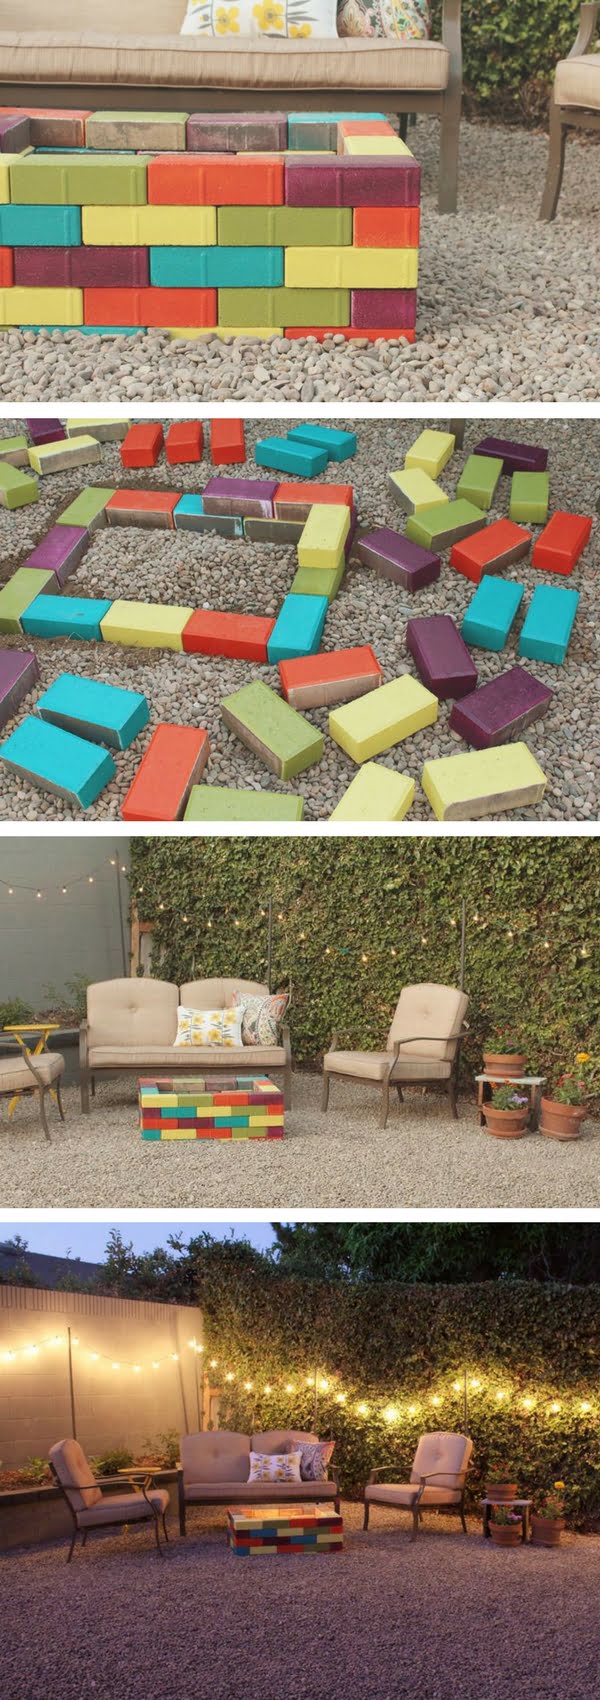 Check out the tutorial on how to make a DIY colorful fire pit